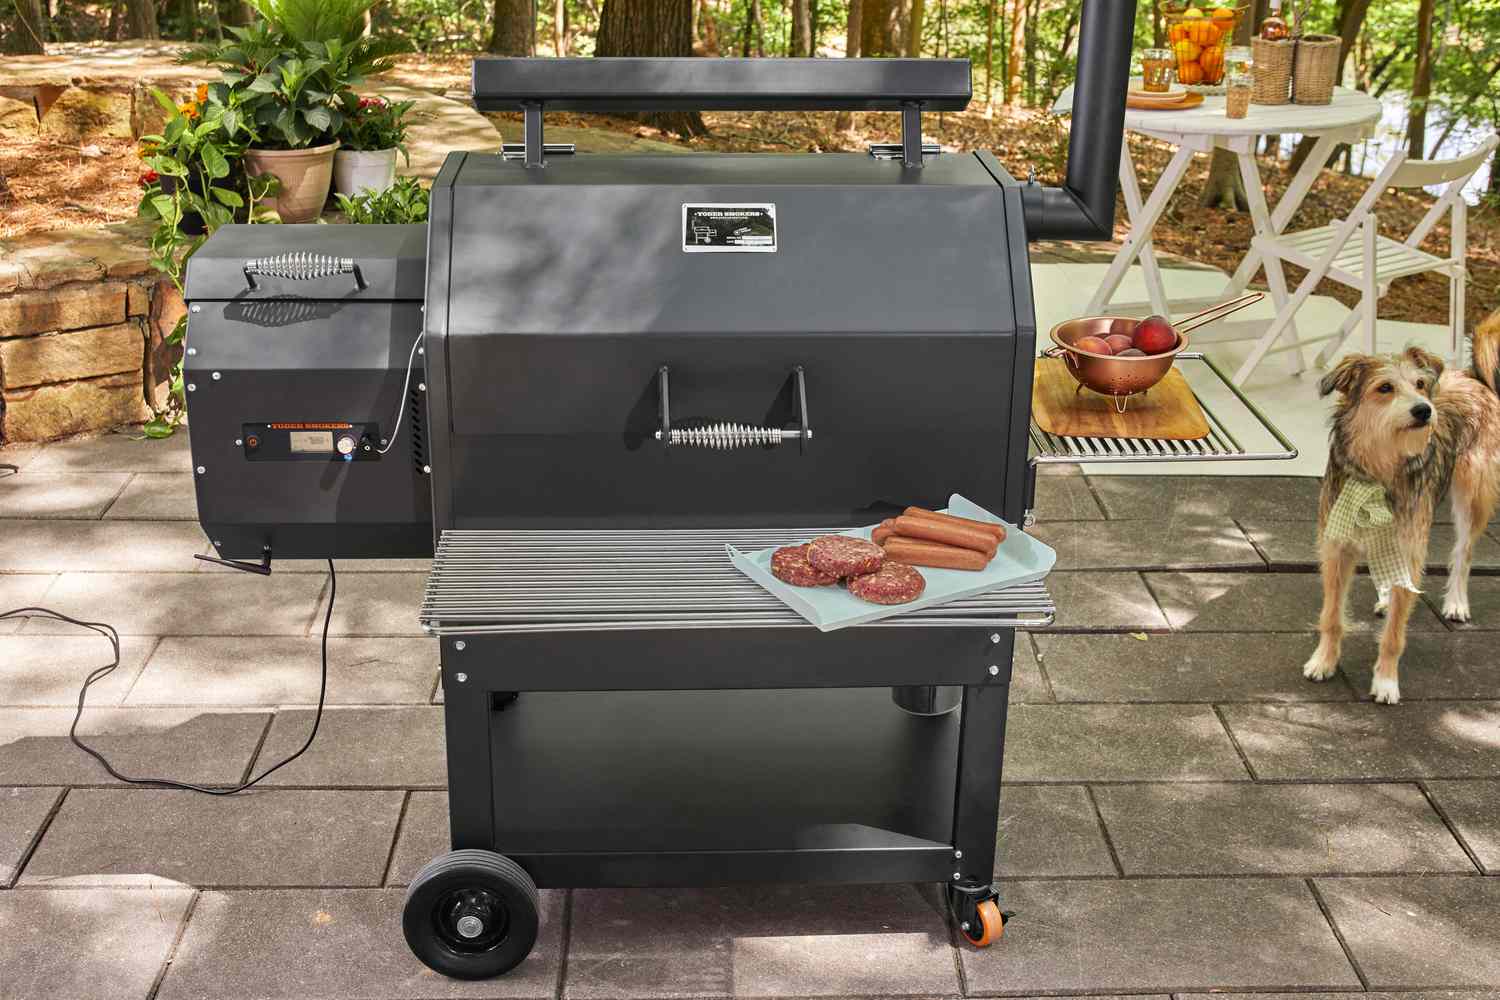 Yoder Smokers YS640S Pellet Grill is displayed on a patio